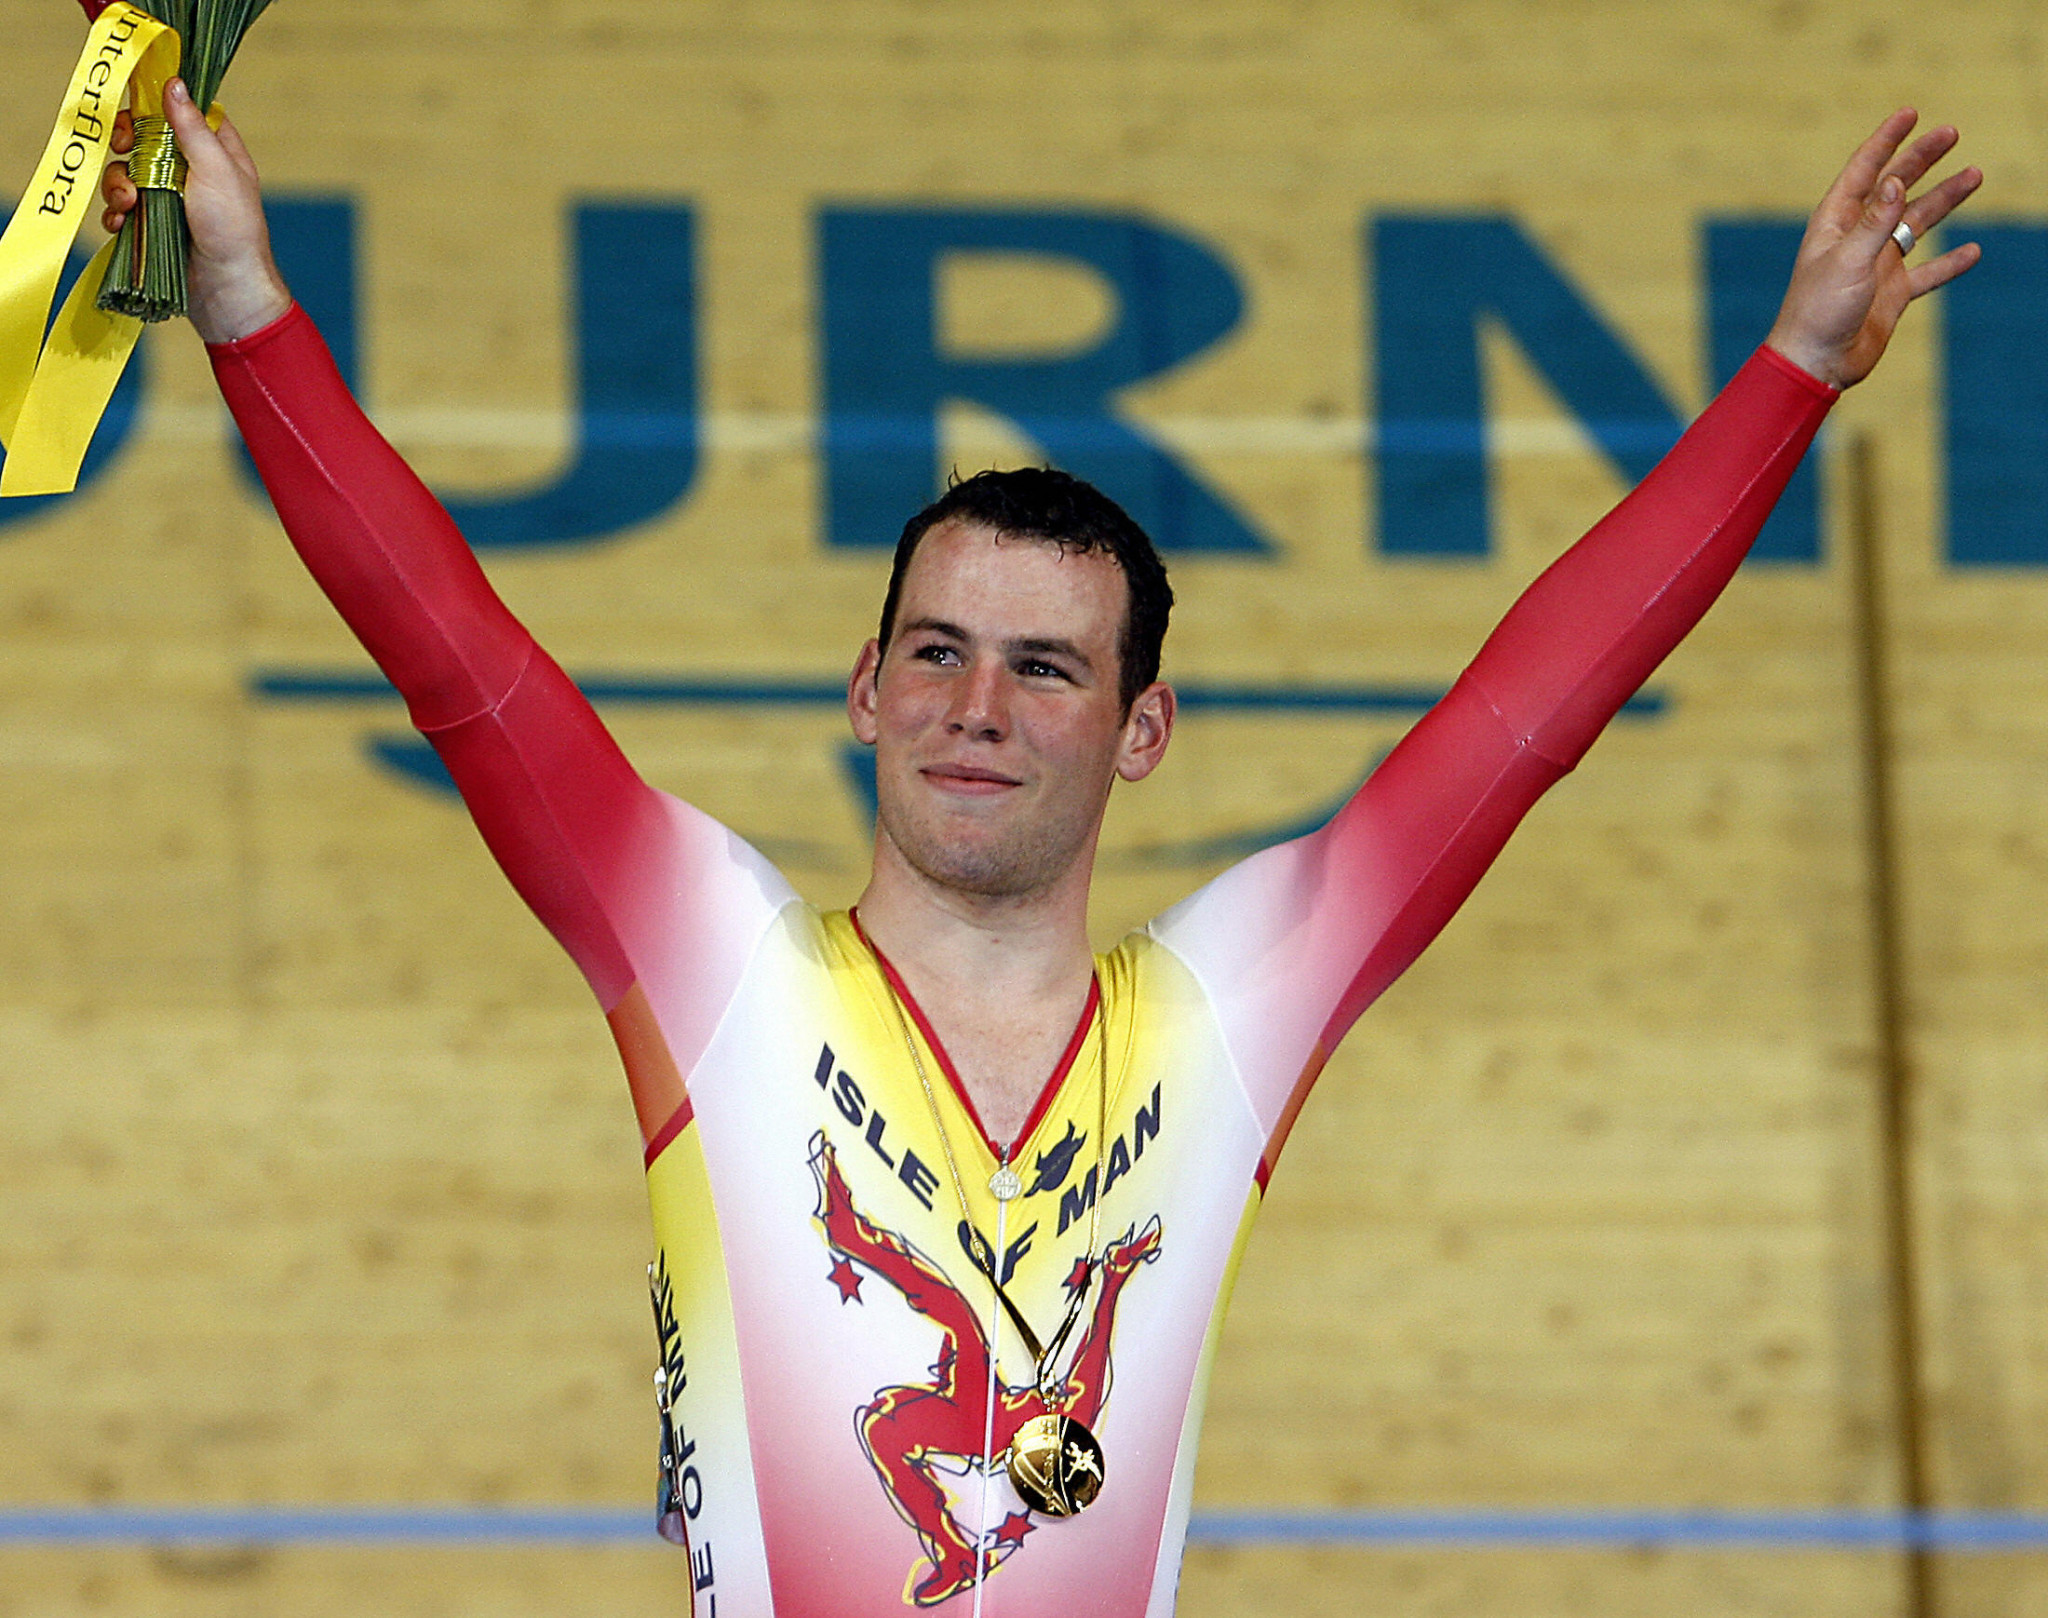 Cyclist Mark Cavendish won Commonwealth gold for Isle of Man in 2006  ©Getty Images